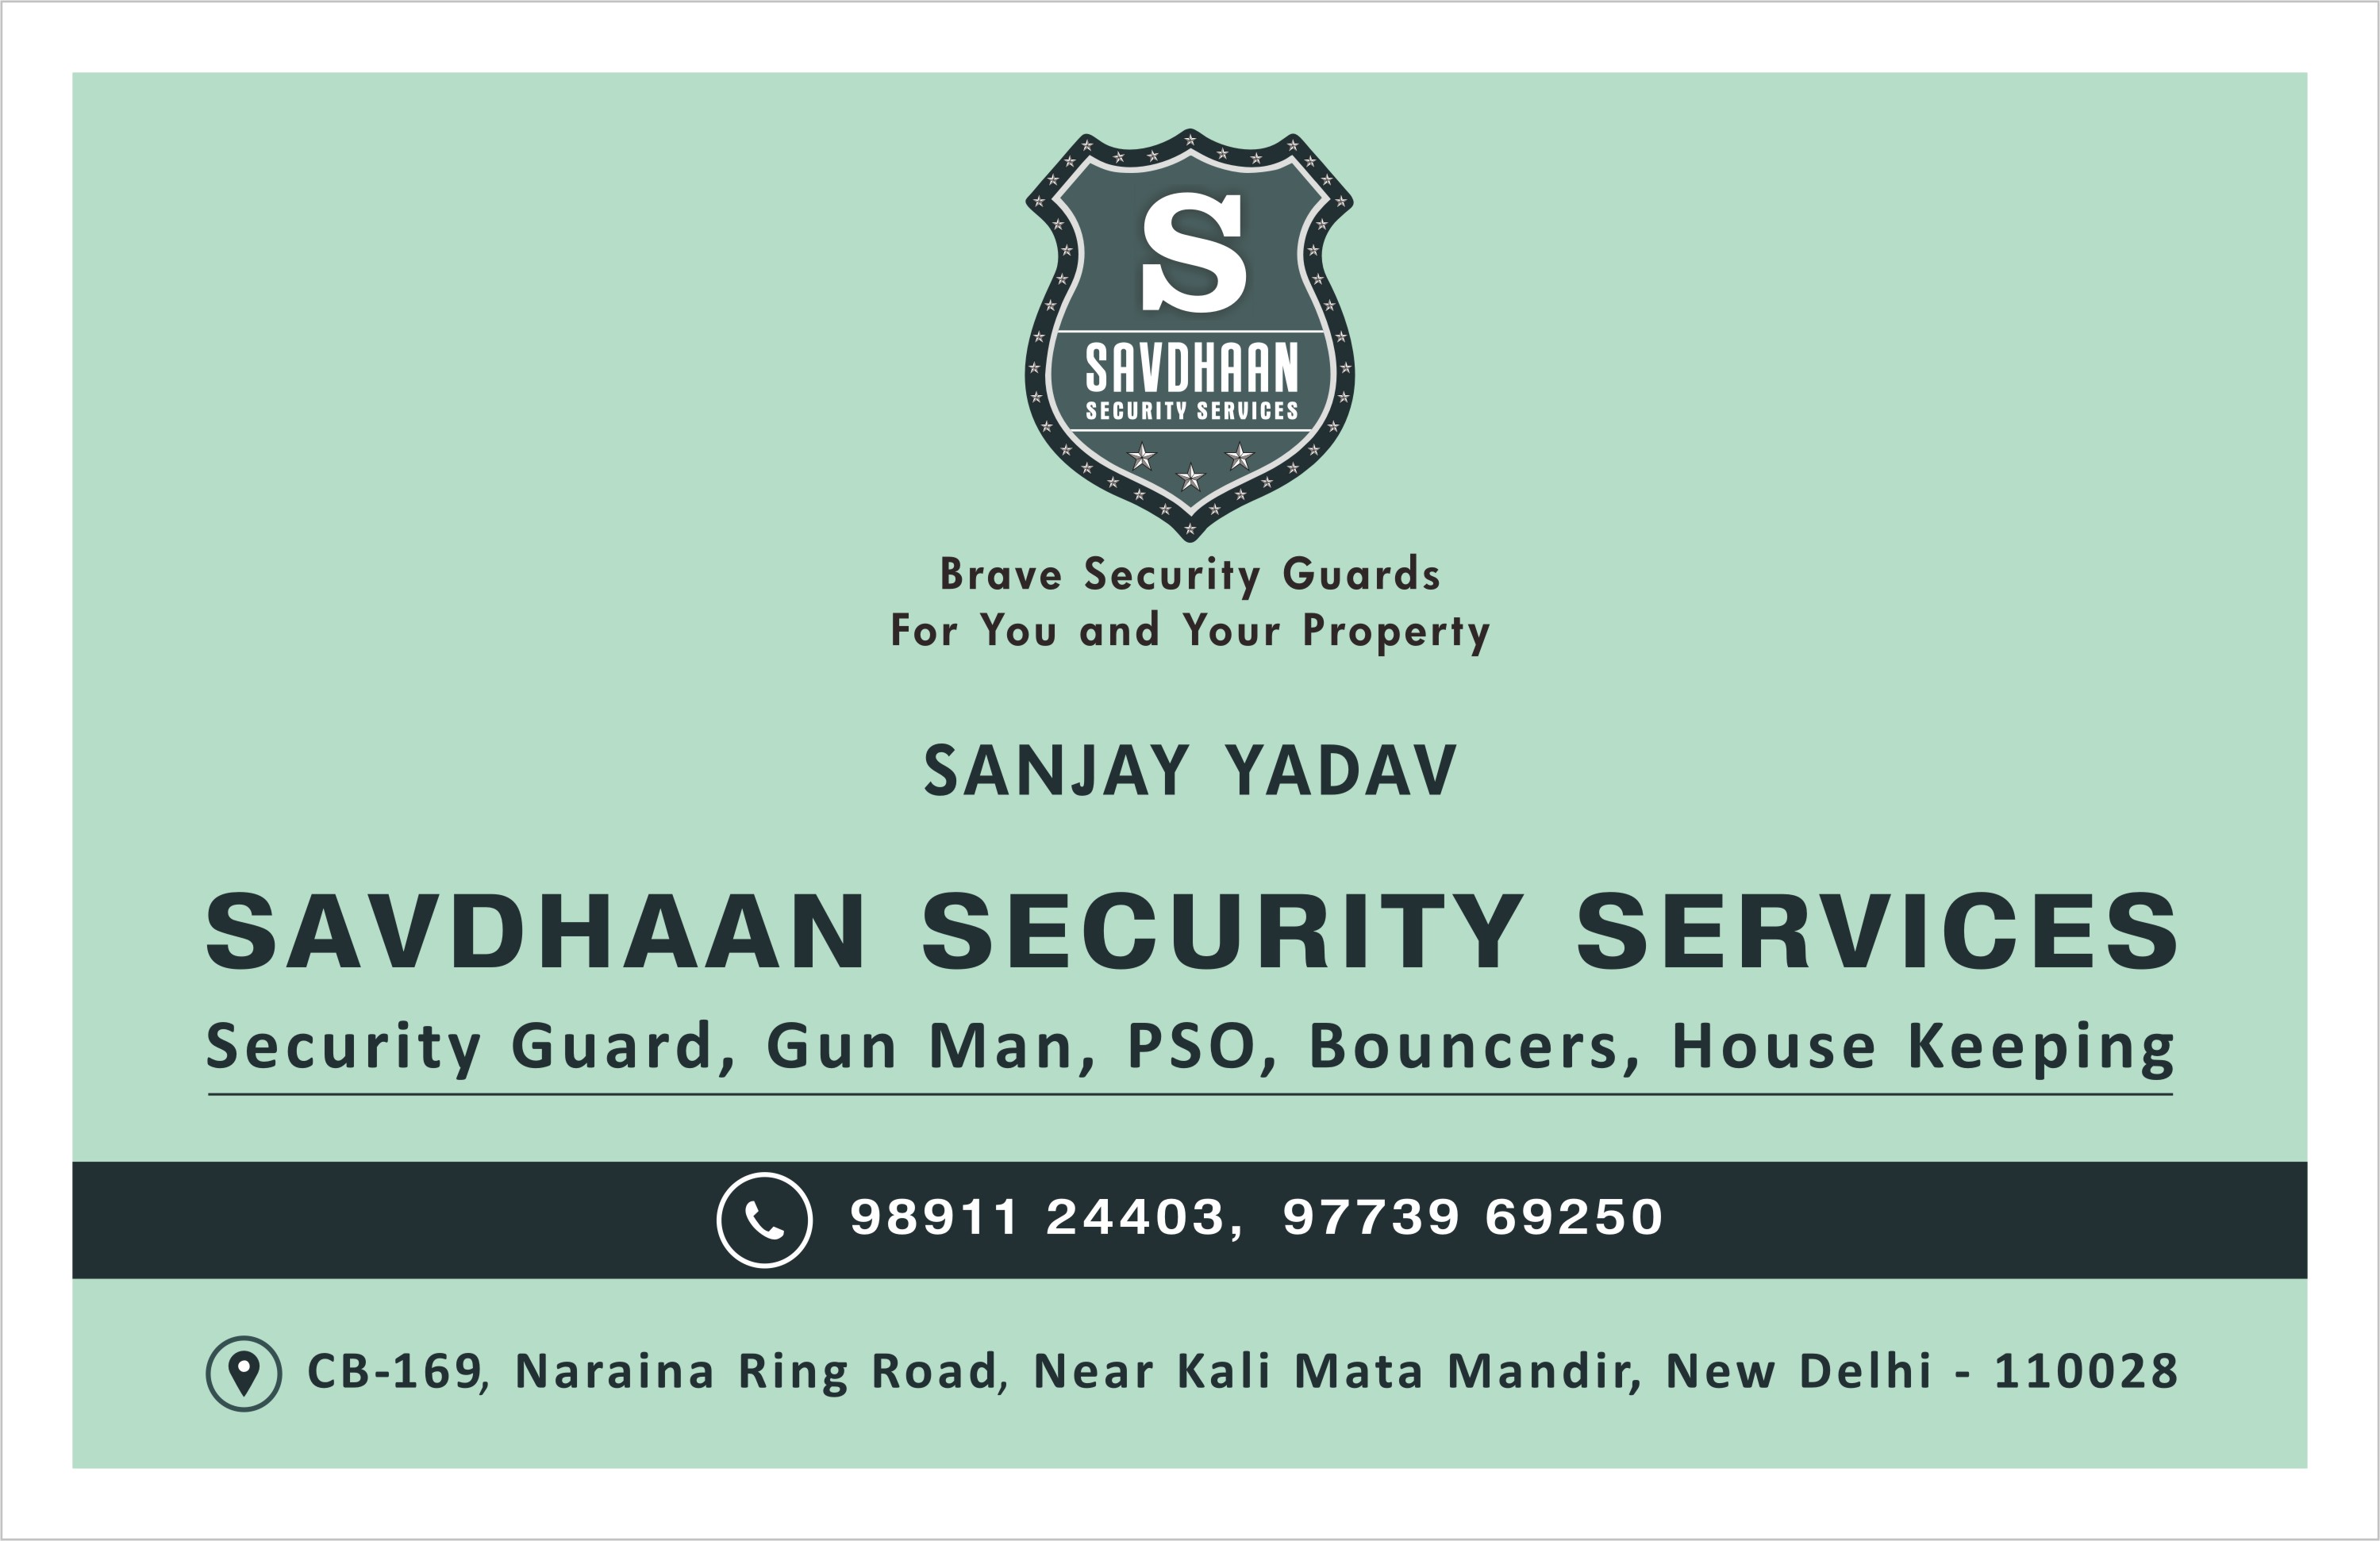 Best Security Guard Service Provider in Delhi NCRServicesEverything ElseWest DelhiOther